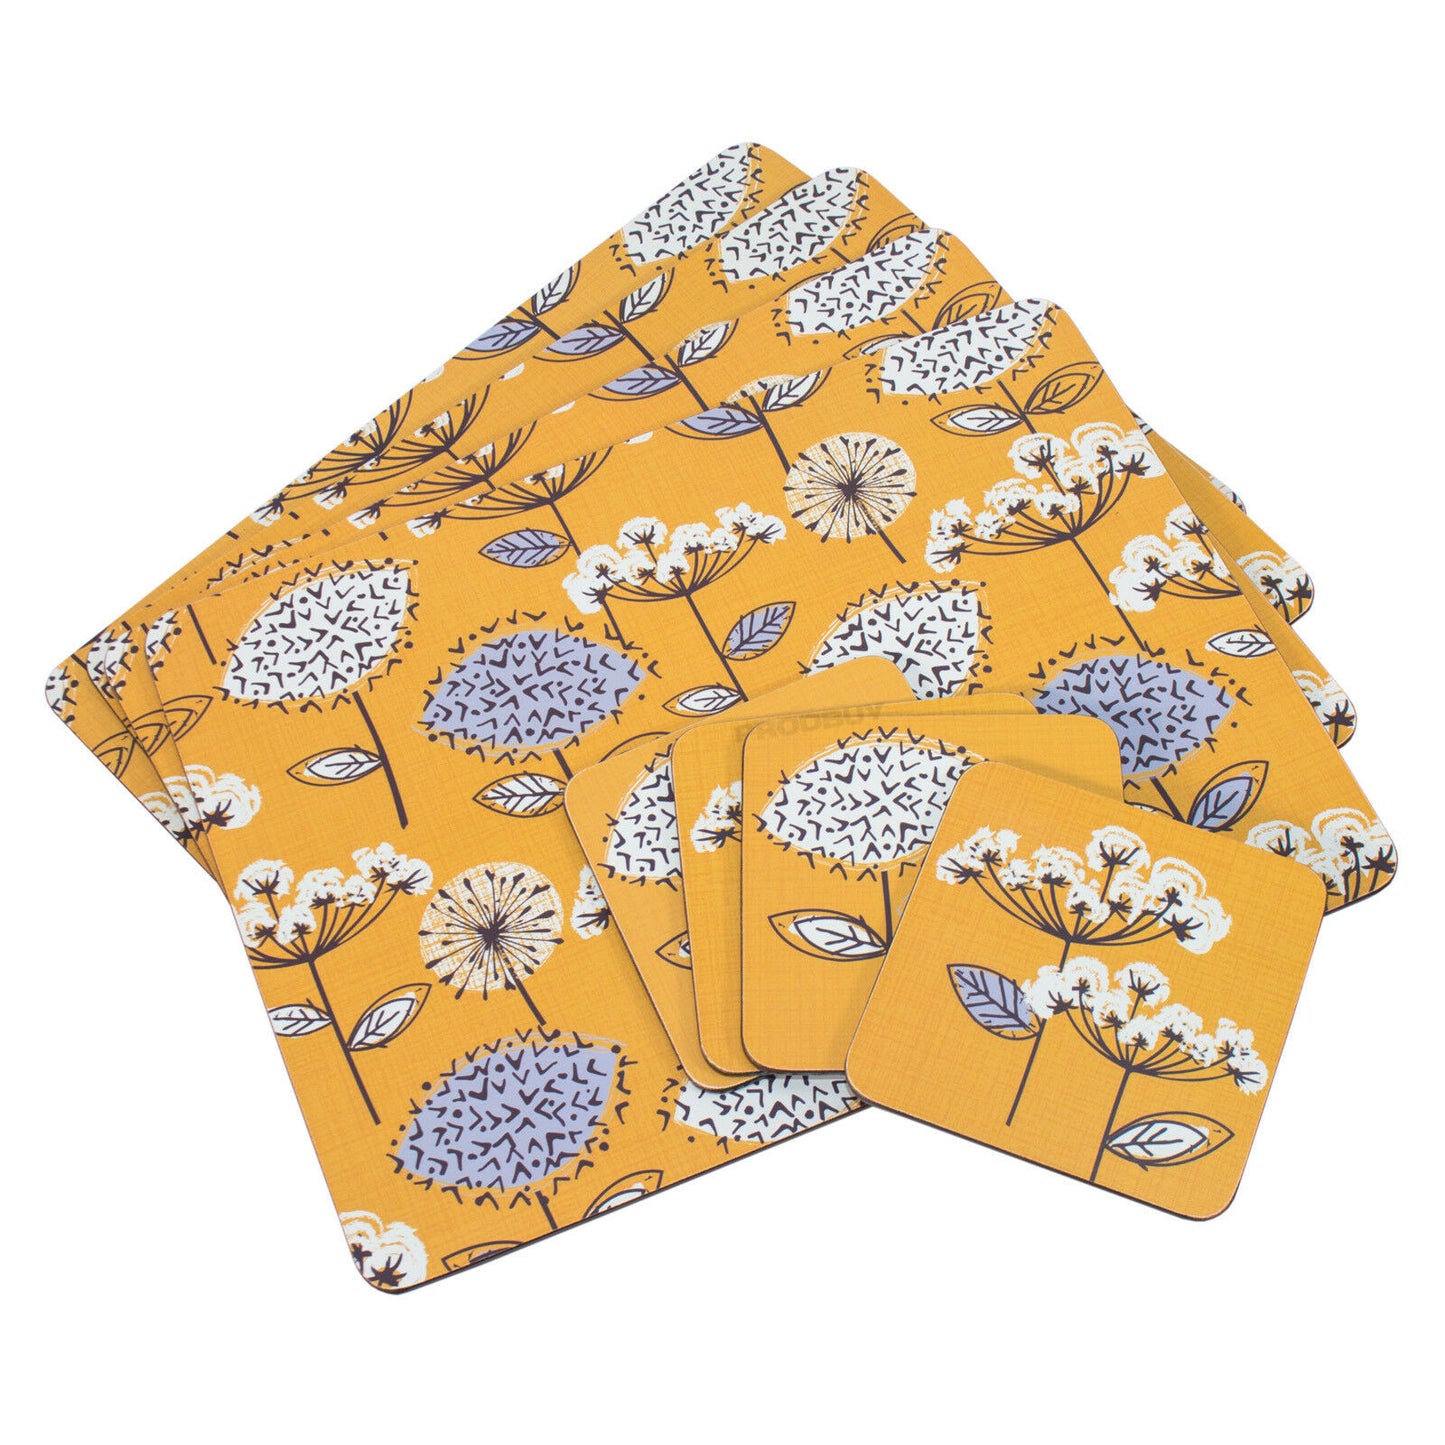 Set of Flower Meadow 4 Placemats & 4 Coasters